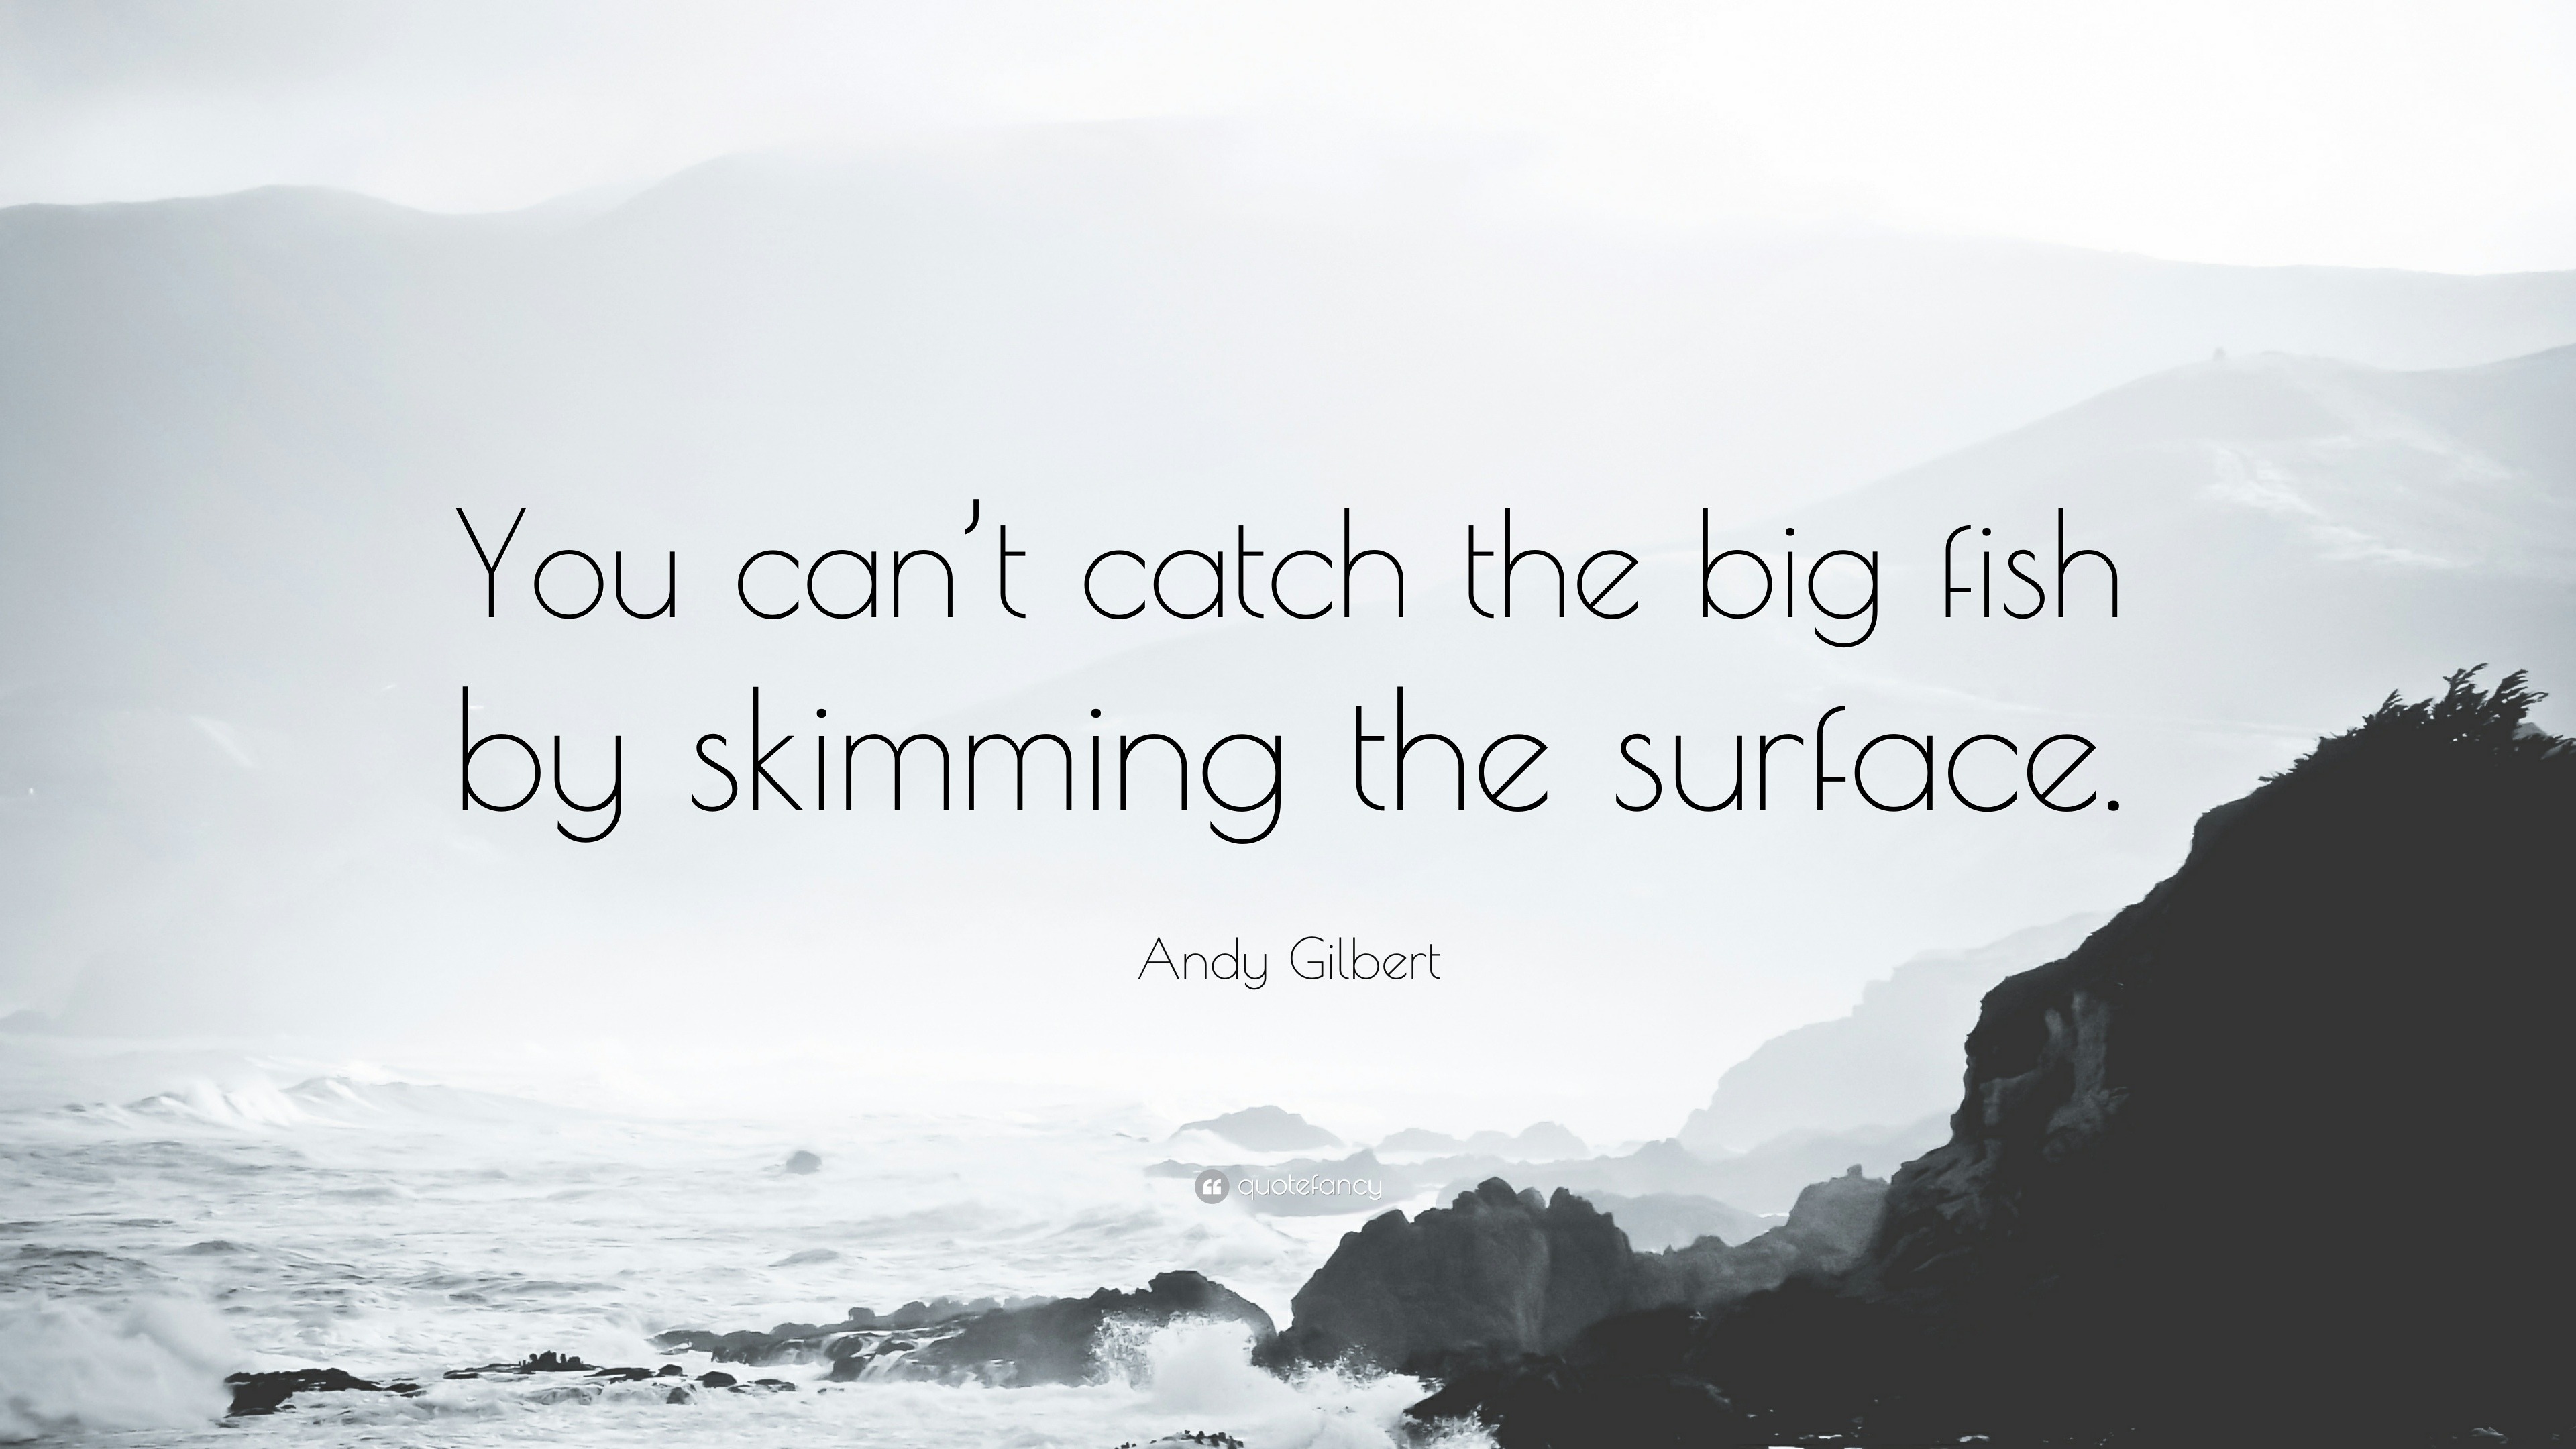 Andy Gilbert quote: You can't catch the big fish by skimming the surface.